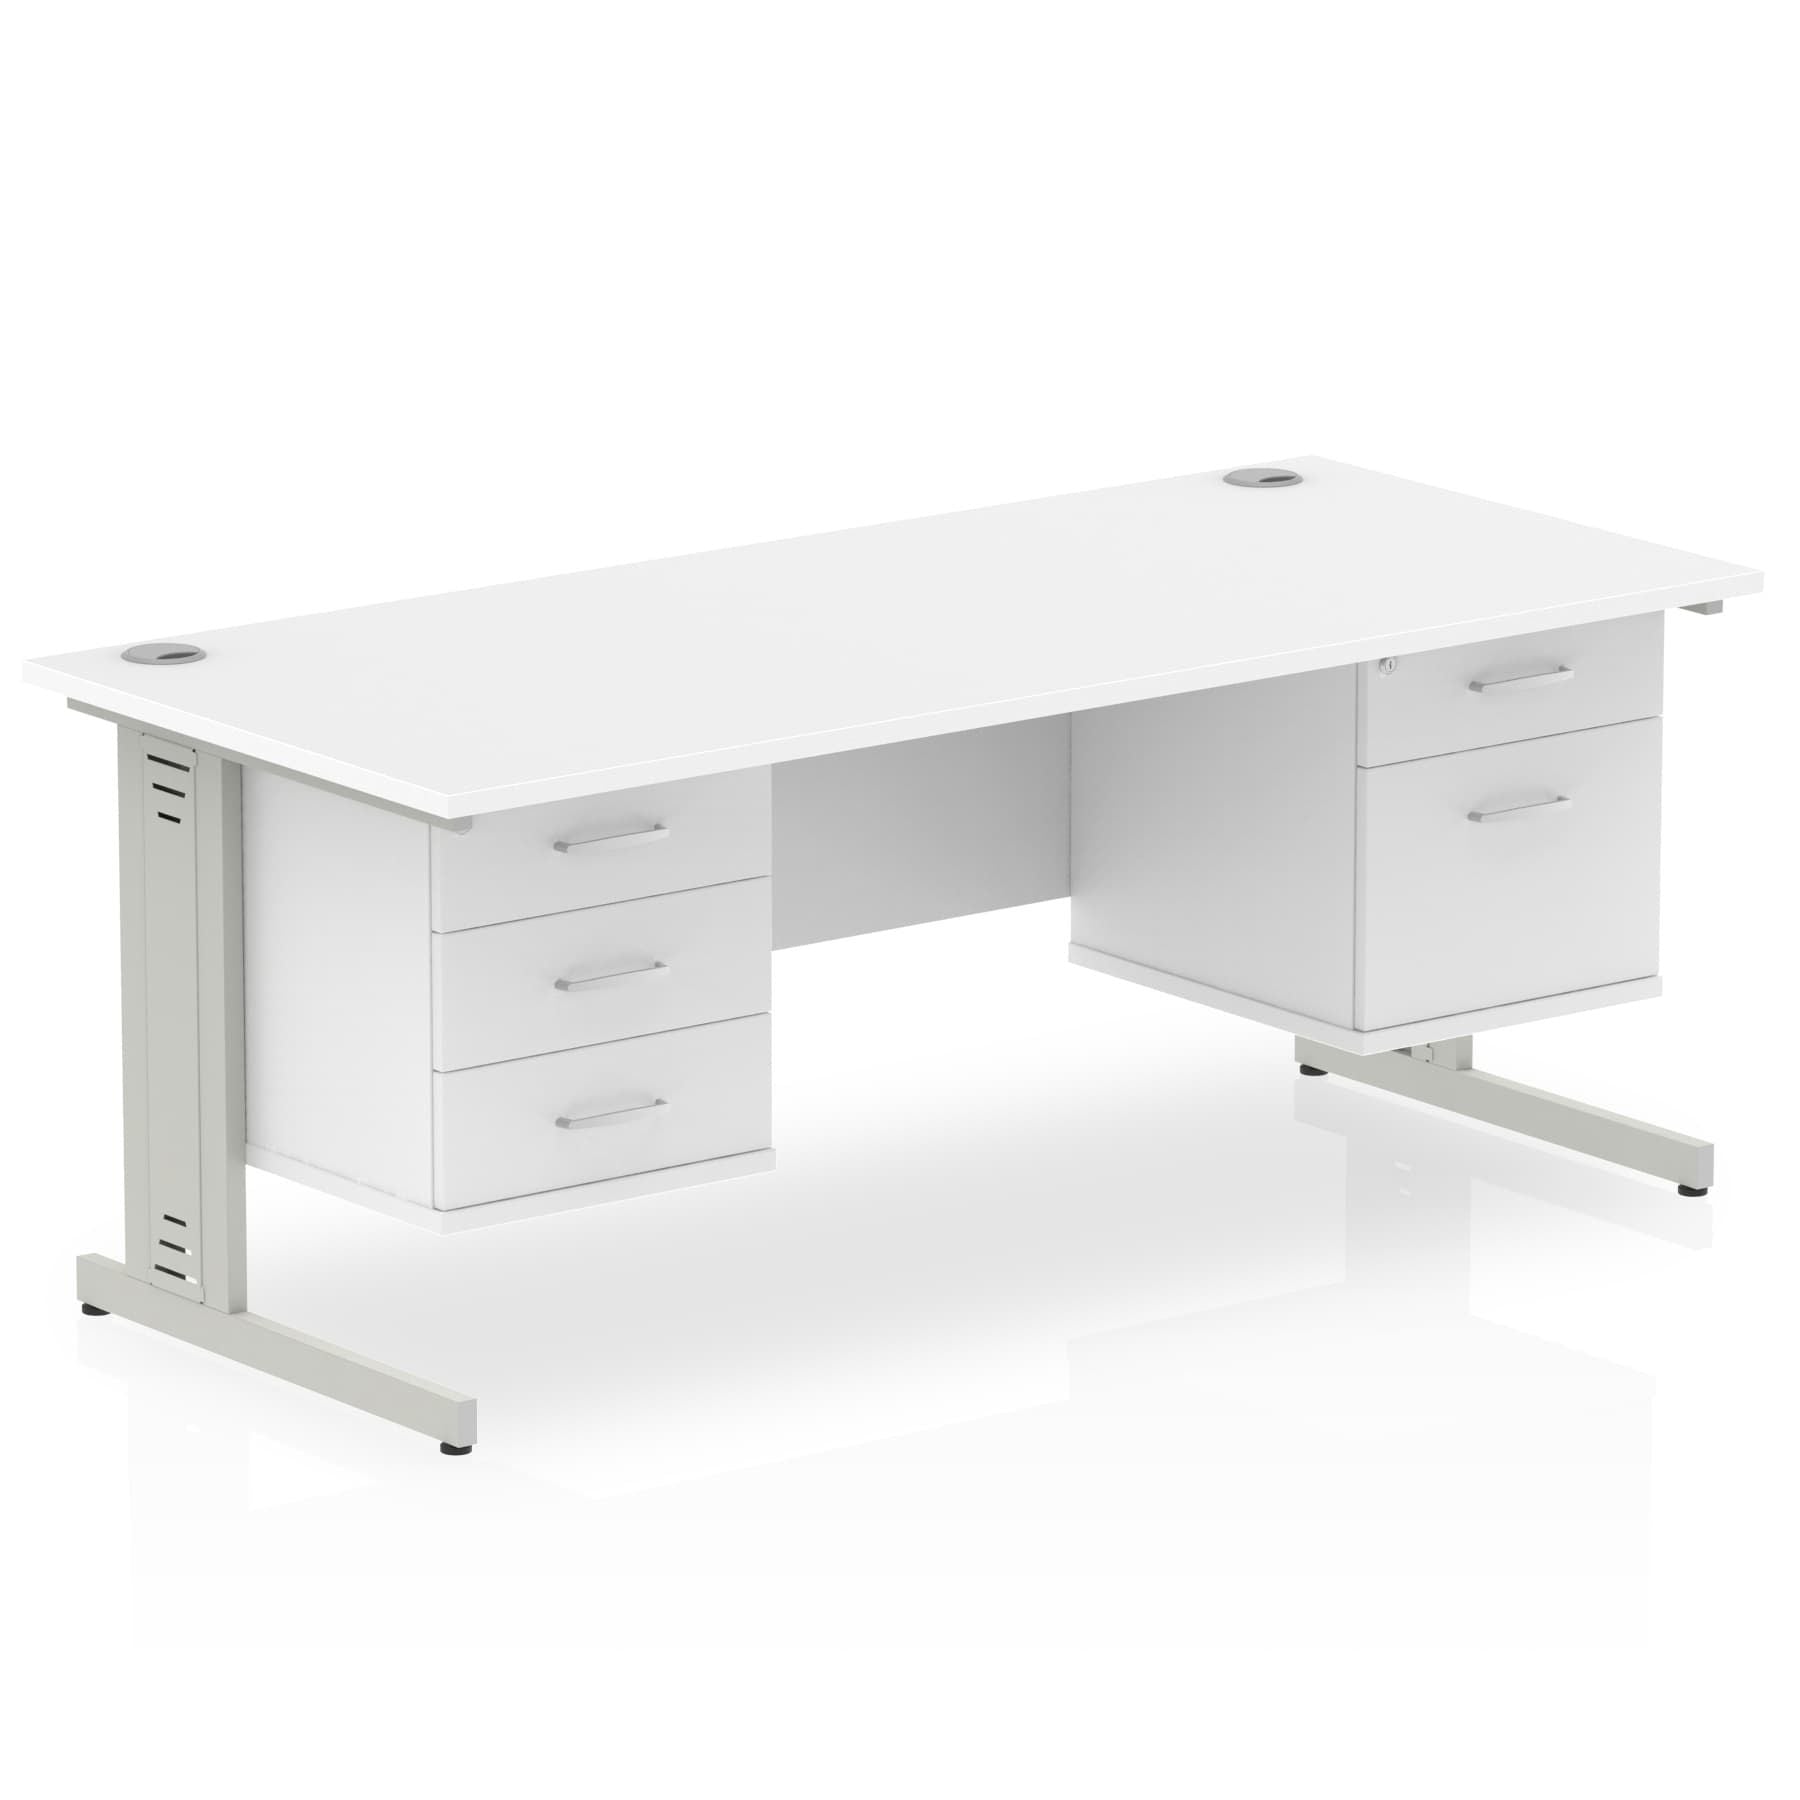 Impulse 1800mm Cable Managed Straight Desk w/ Fixed Pedestal - MFC Rectangular, Self-Assembly, 5-Year Guarantee, 1800x800 Top, Silver/White Frame